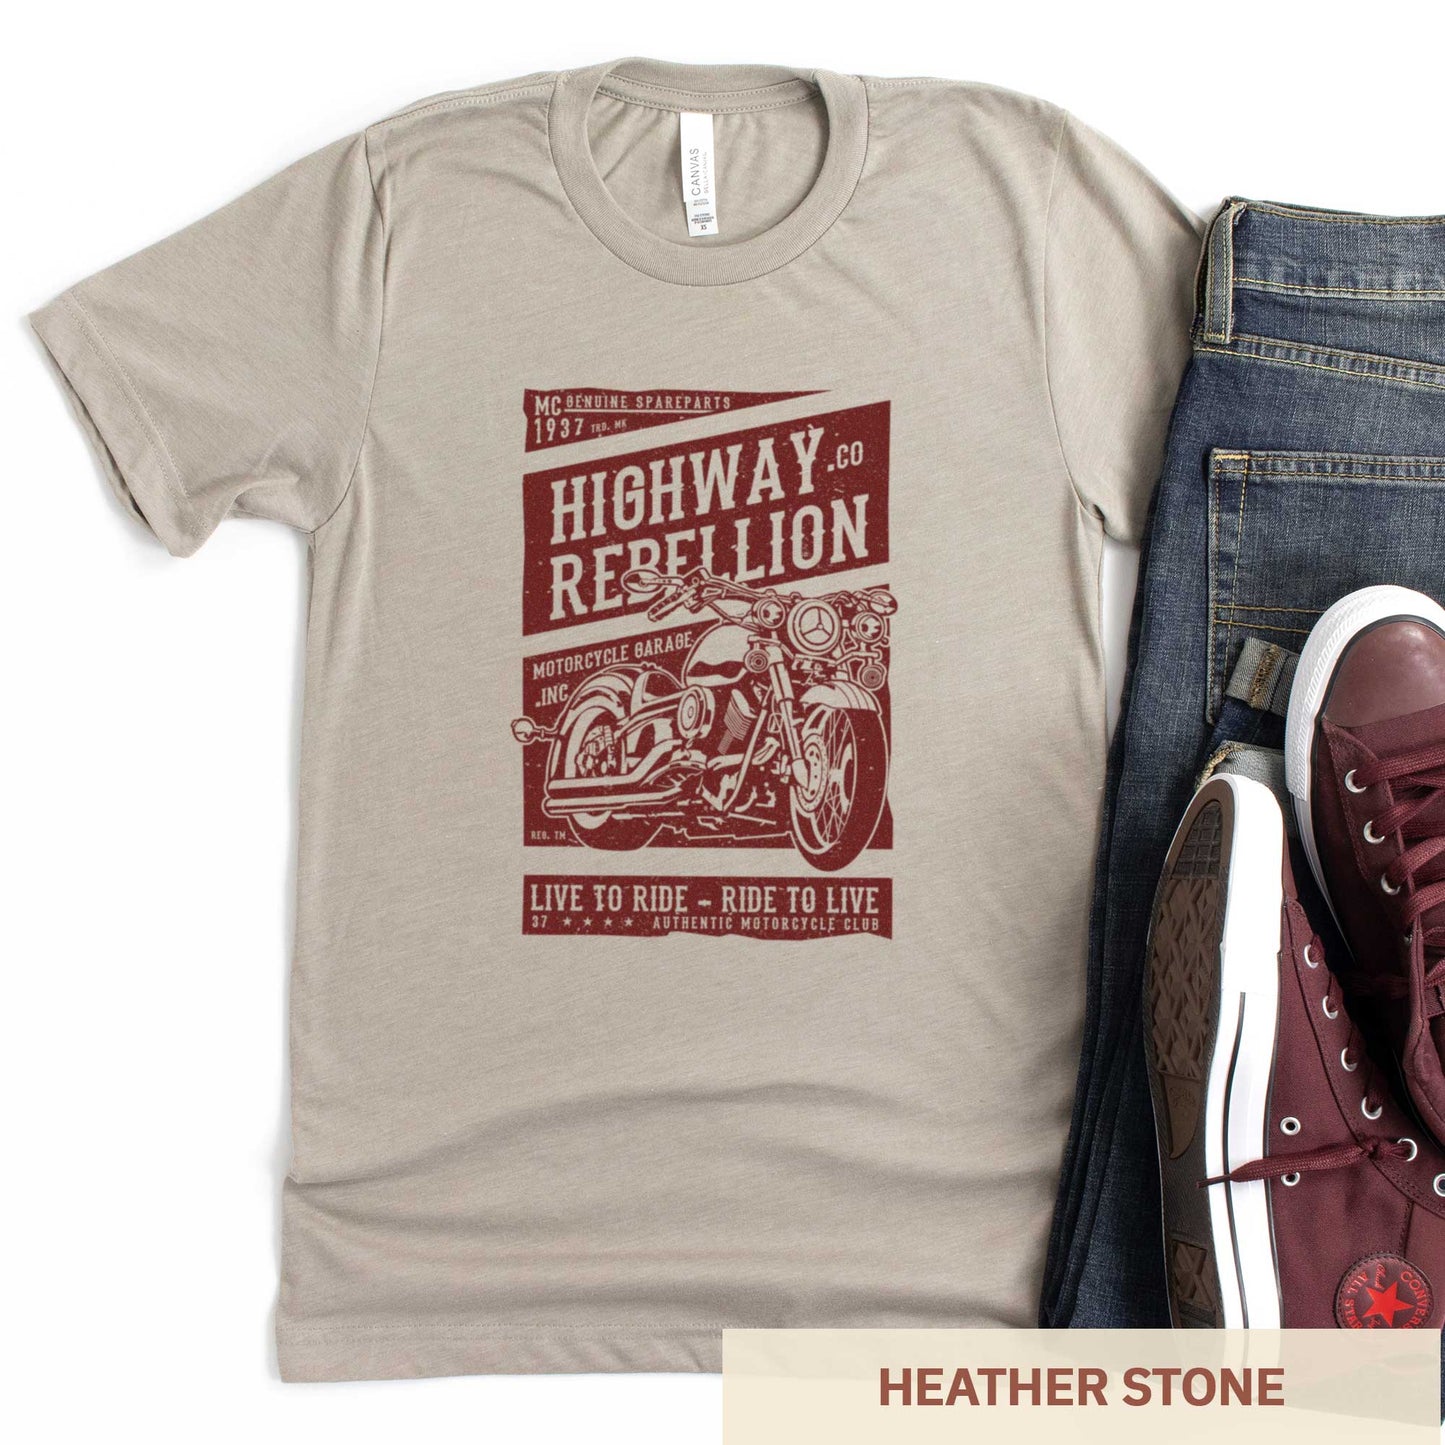 A heather stone Bella Canvas t-shirt featuring a motorcycle and the words highway rebellion live to ride - ride to live.